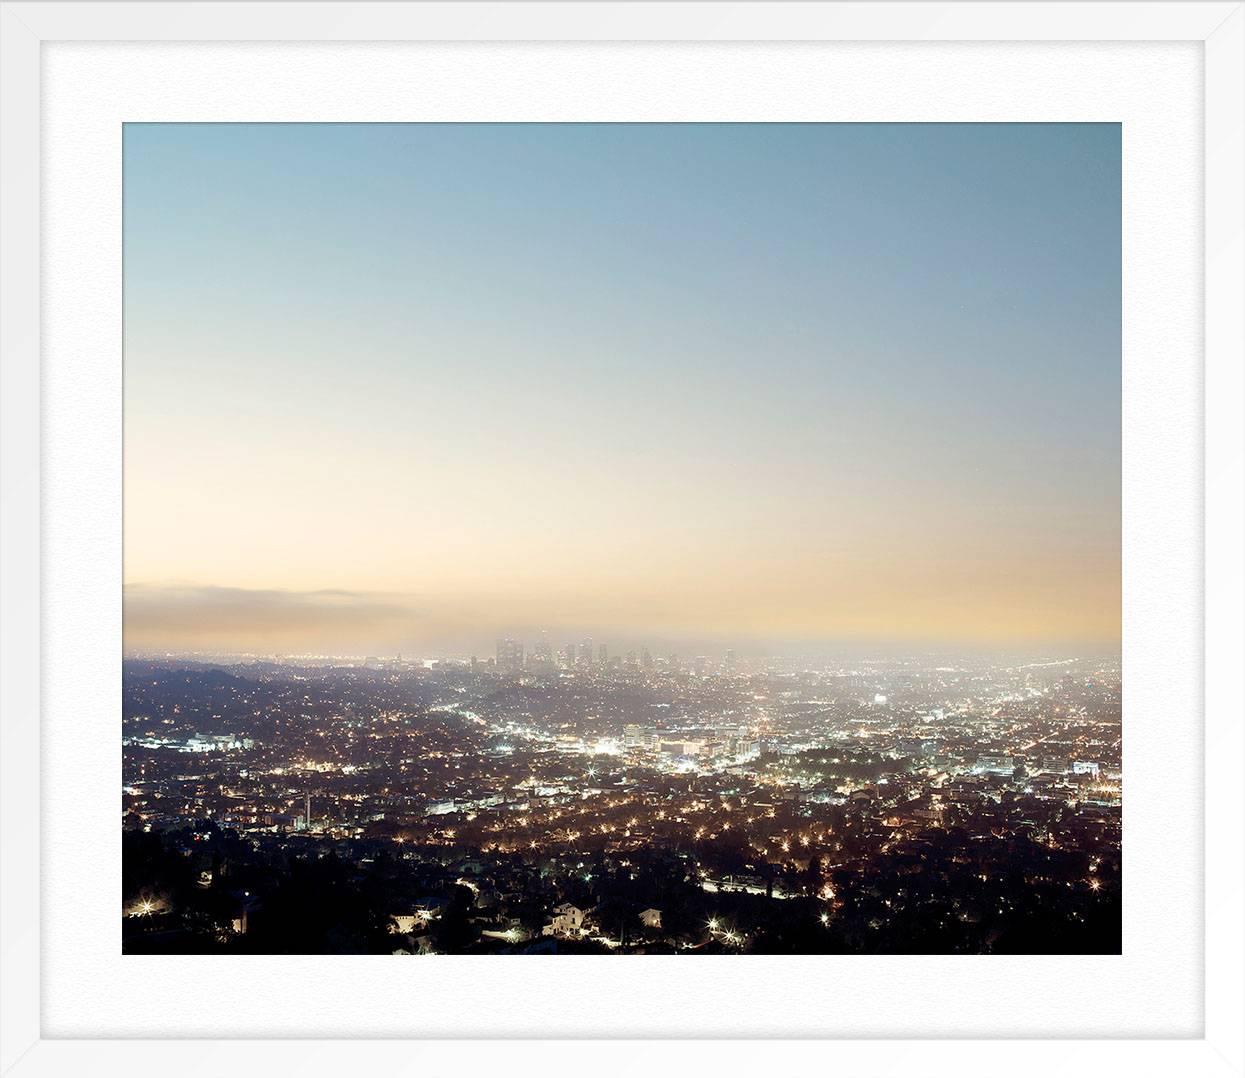 ABOUT THIS PIECE: French artist Ludwig Favre traveled to California to shoot the state's most iconic landscape and architecture. He captures the city at dusk from the top of the Griffith Observatory.

ABOUT THIS ARTIST: Photographer Ludwig Favre was